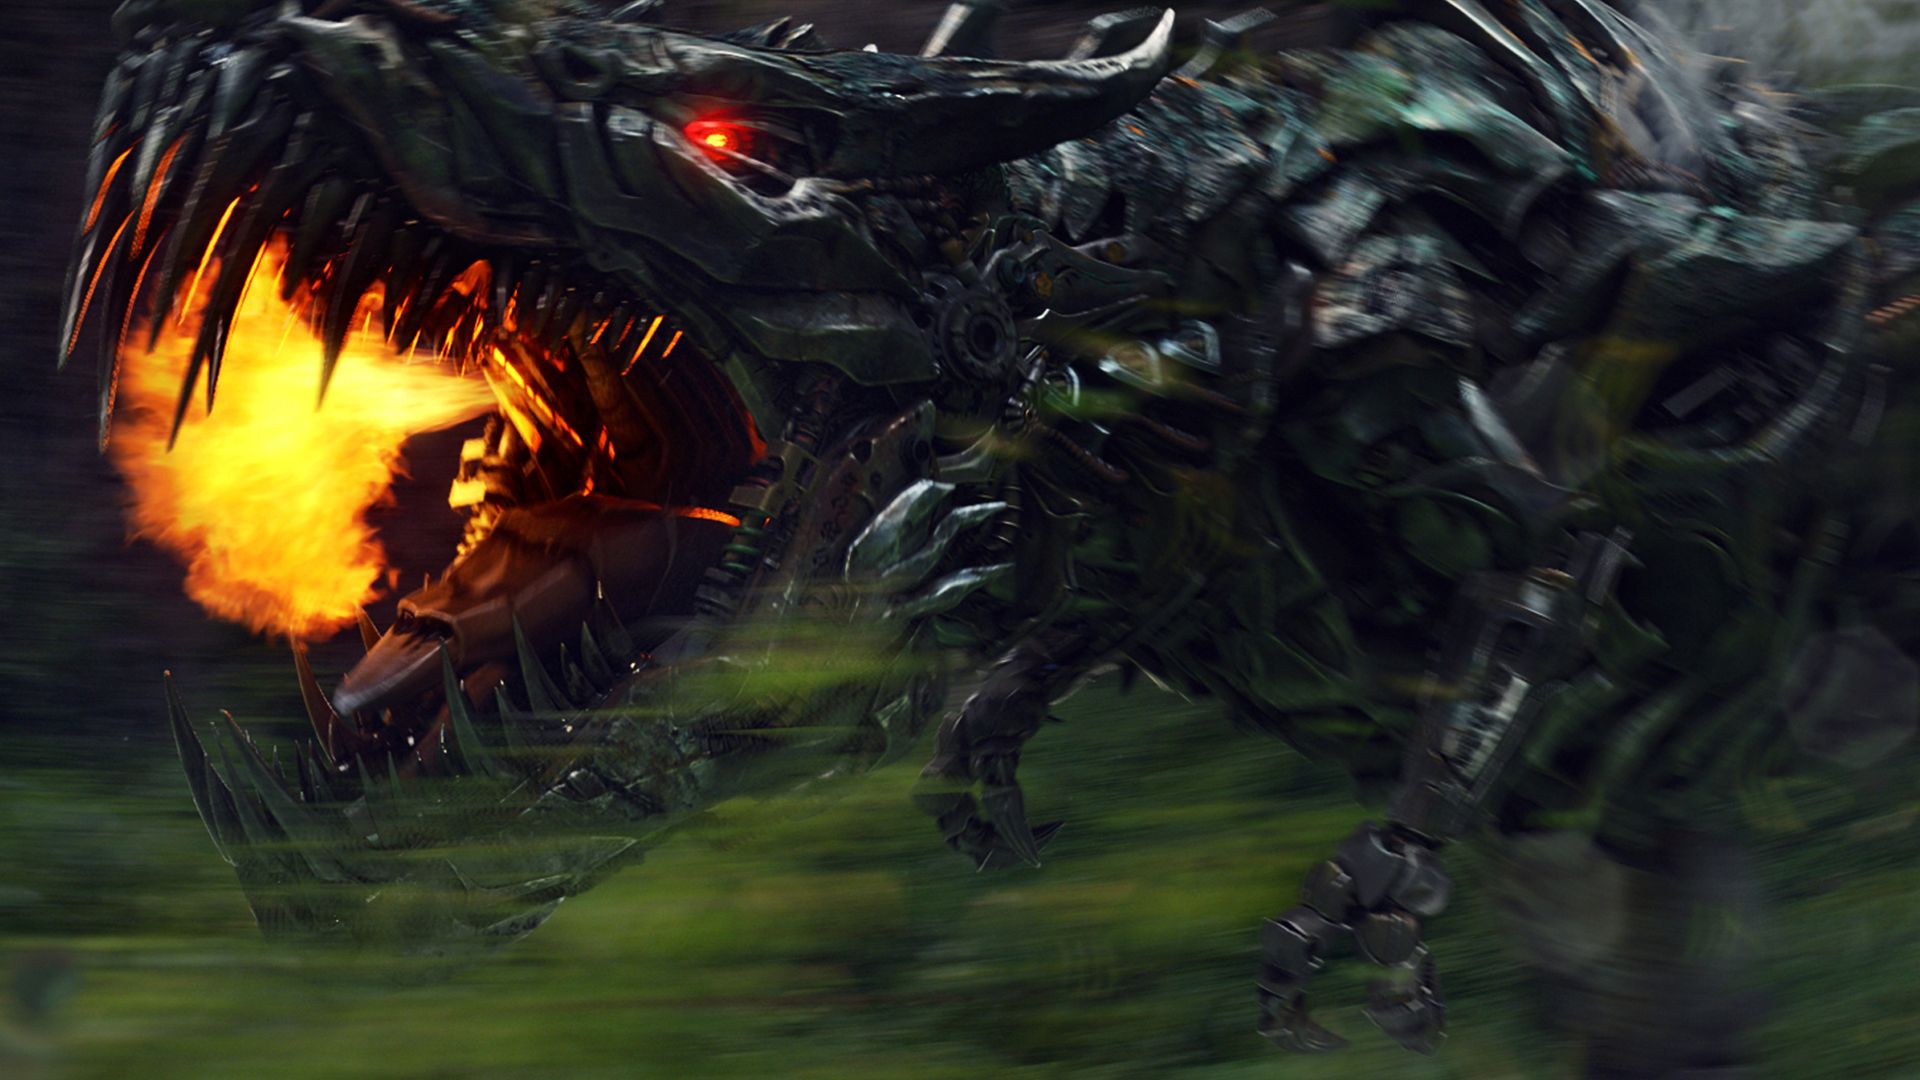 Transformers: Age of Extinction | HD Wallpapers | Page 2